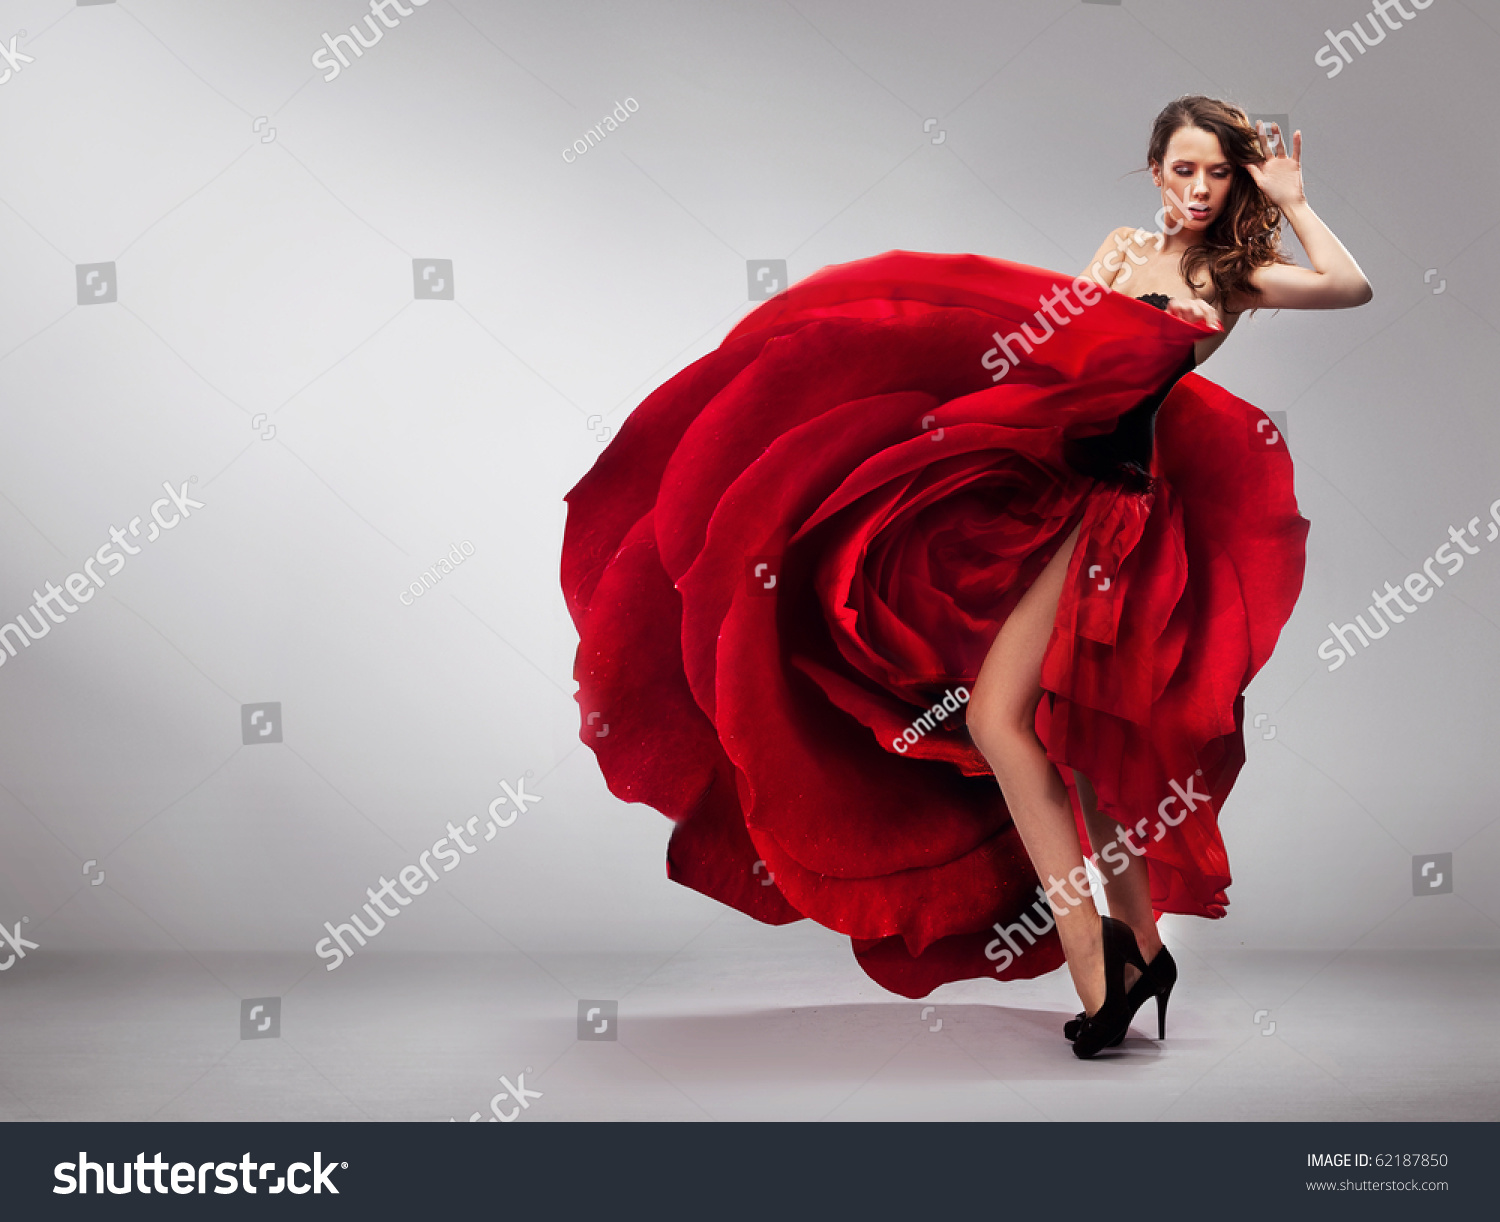 Beautiful Young Lady Wearing Red Rose Stock Photo 62187850 